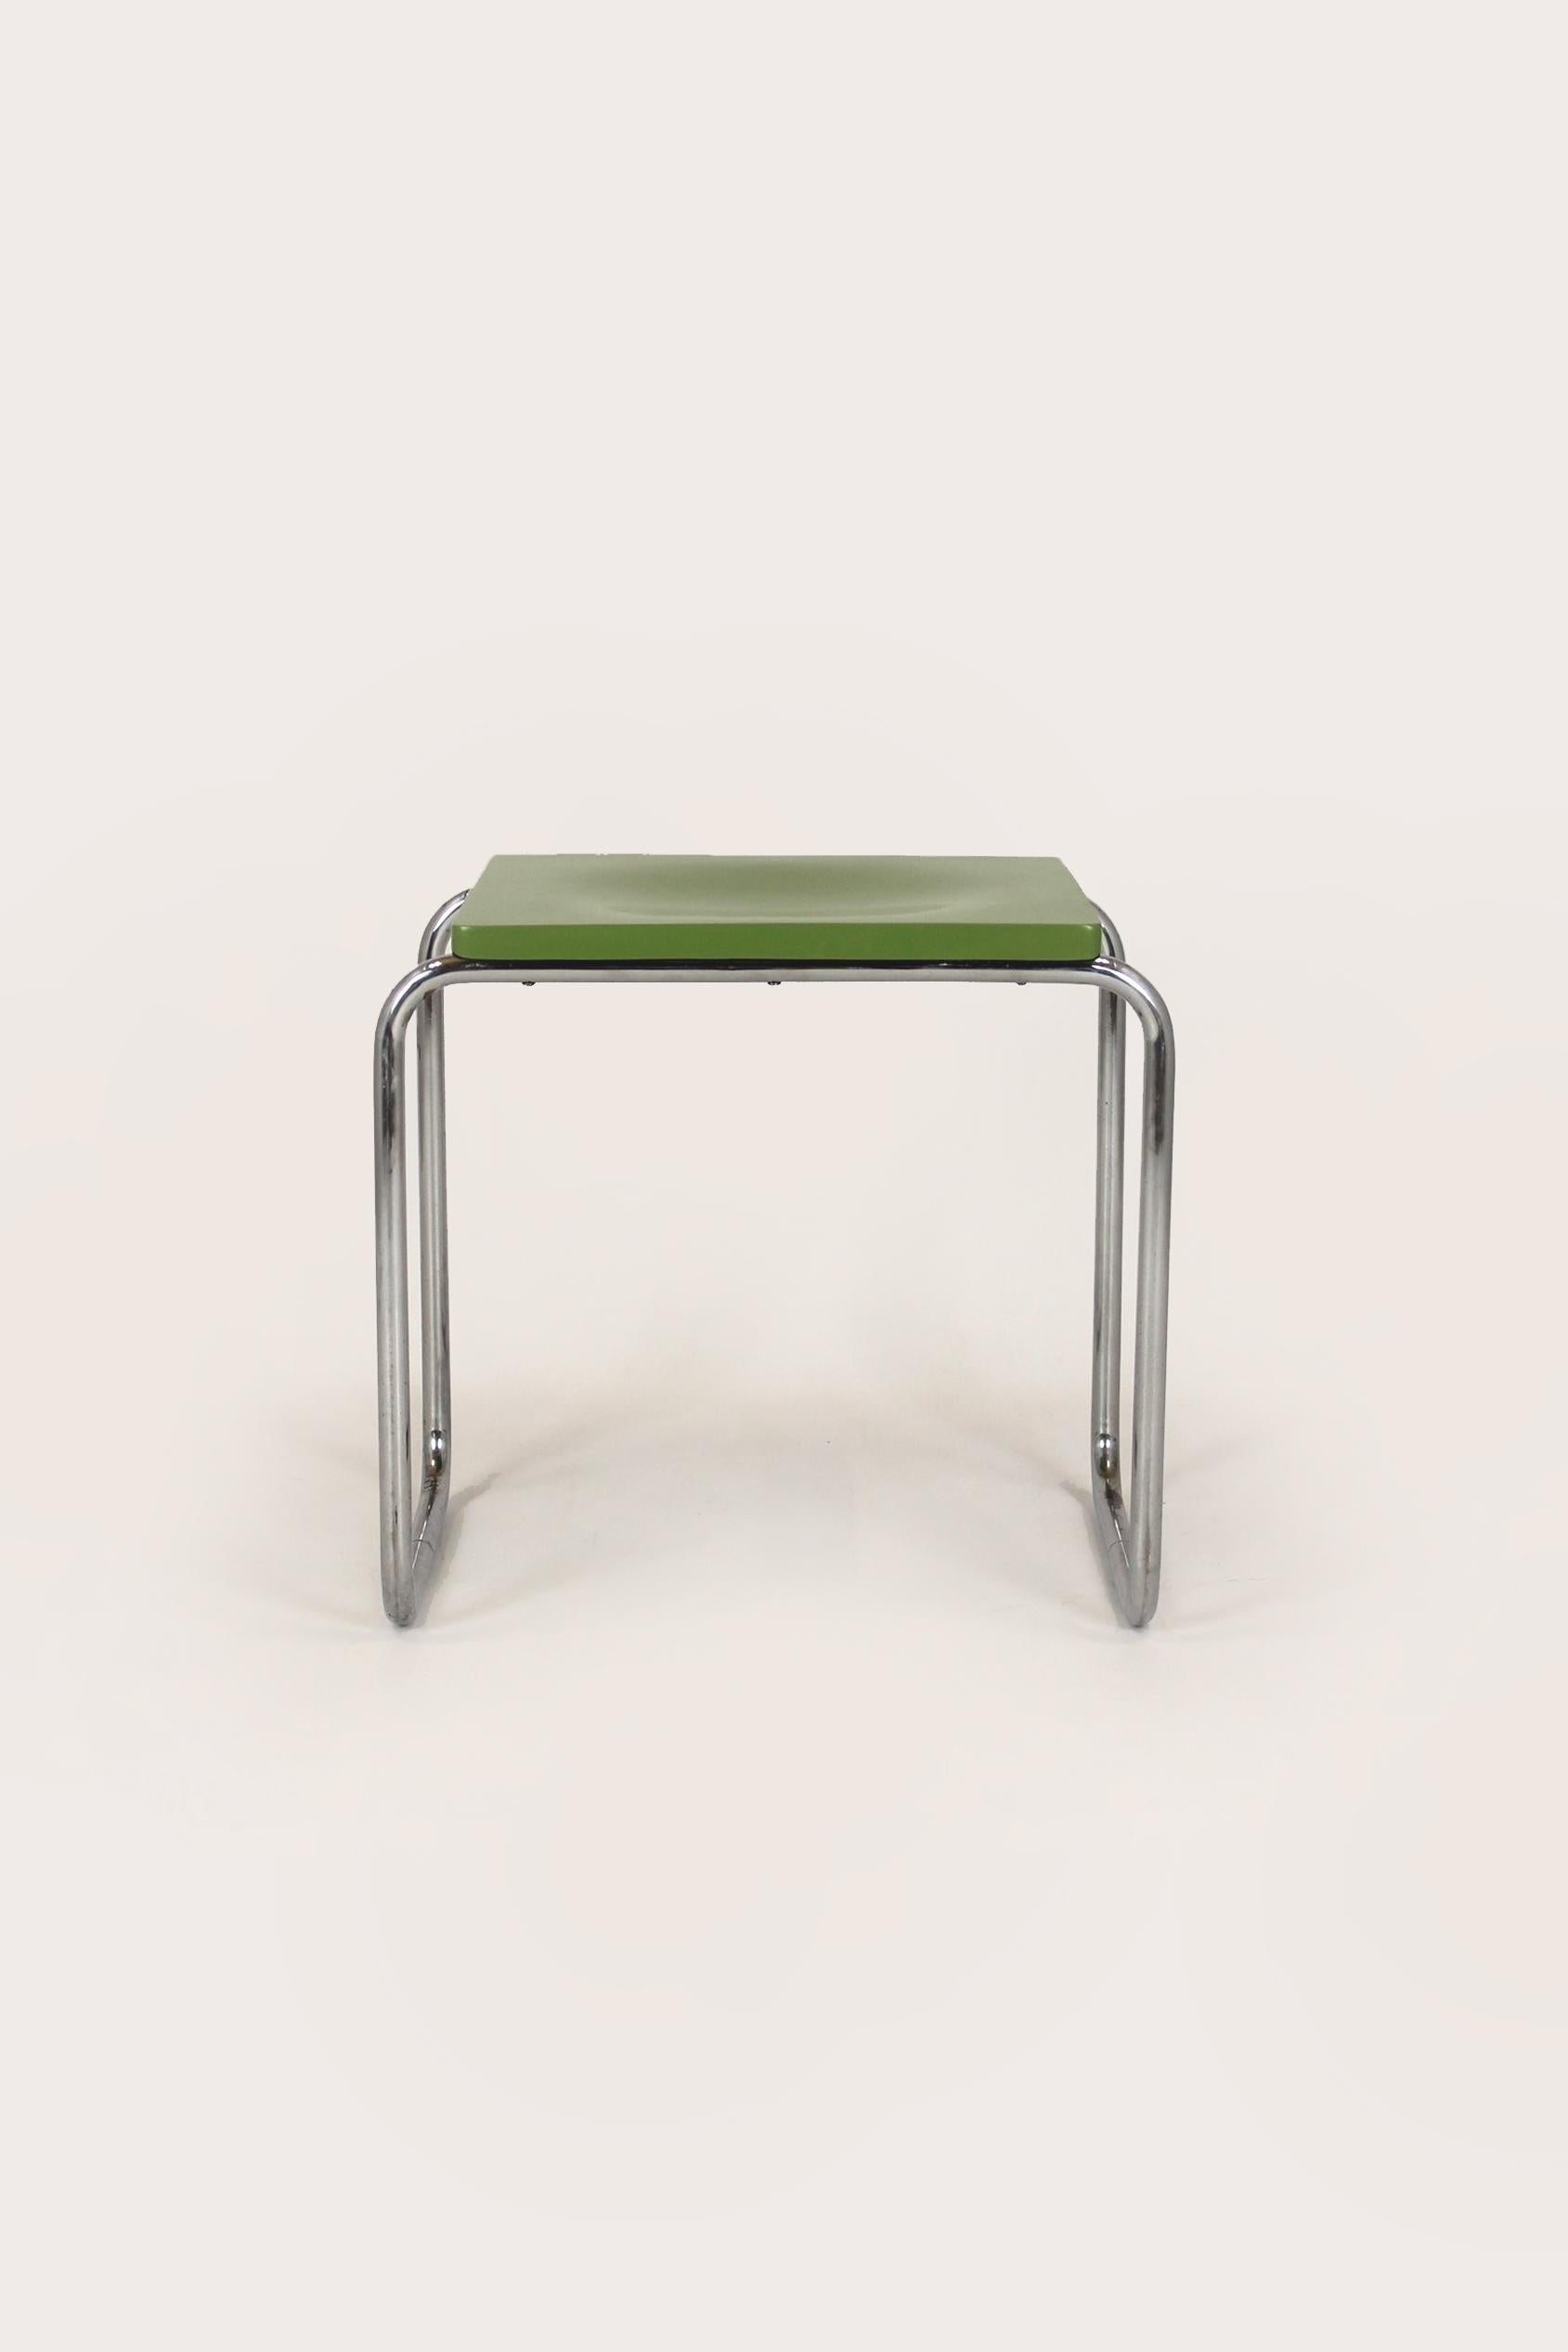 This Bauhaus style stool was manufactured by Slezak in the Czech Republic in the 1930s. Made of chromed tubular steel with a molded plywood seat. Steel elements in good condition with visible patina, seat repainted in original color, well-preserved